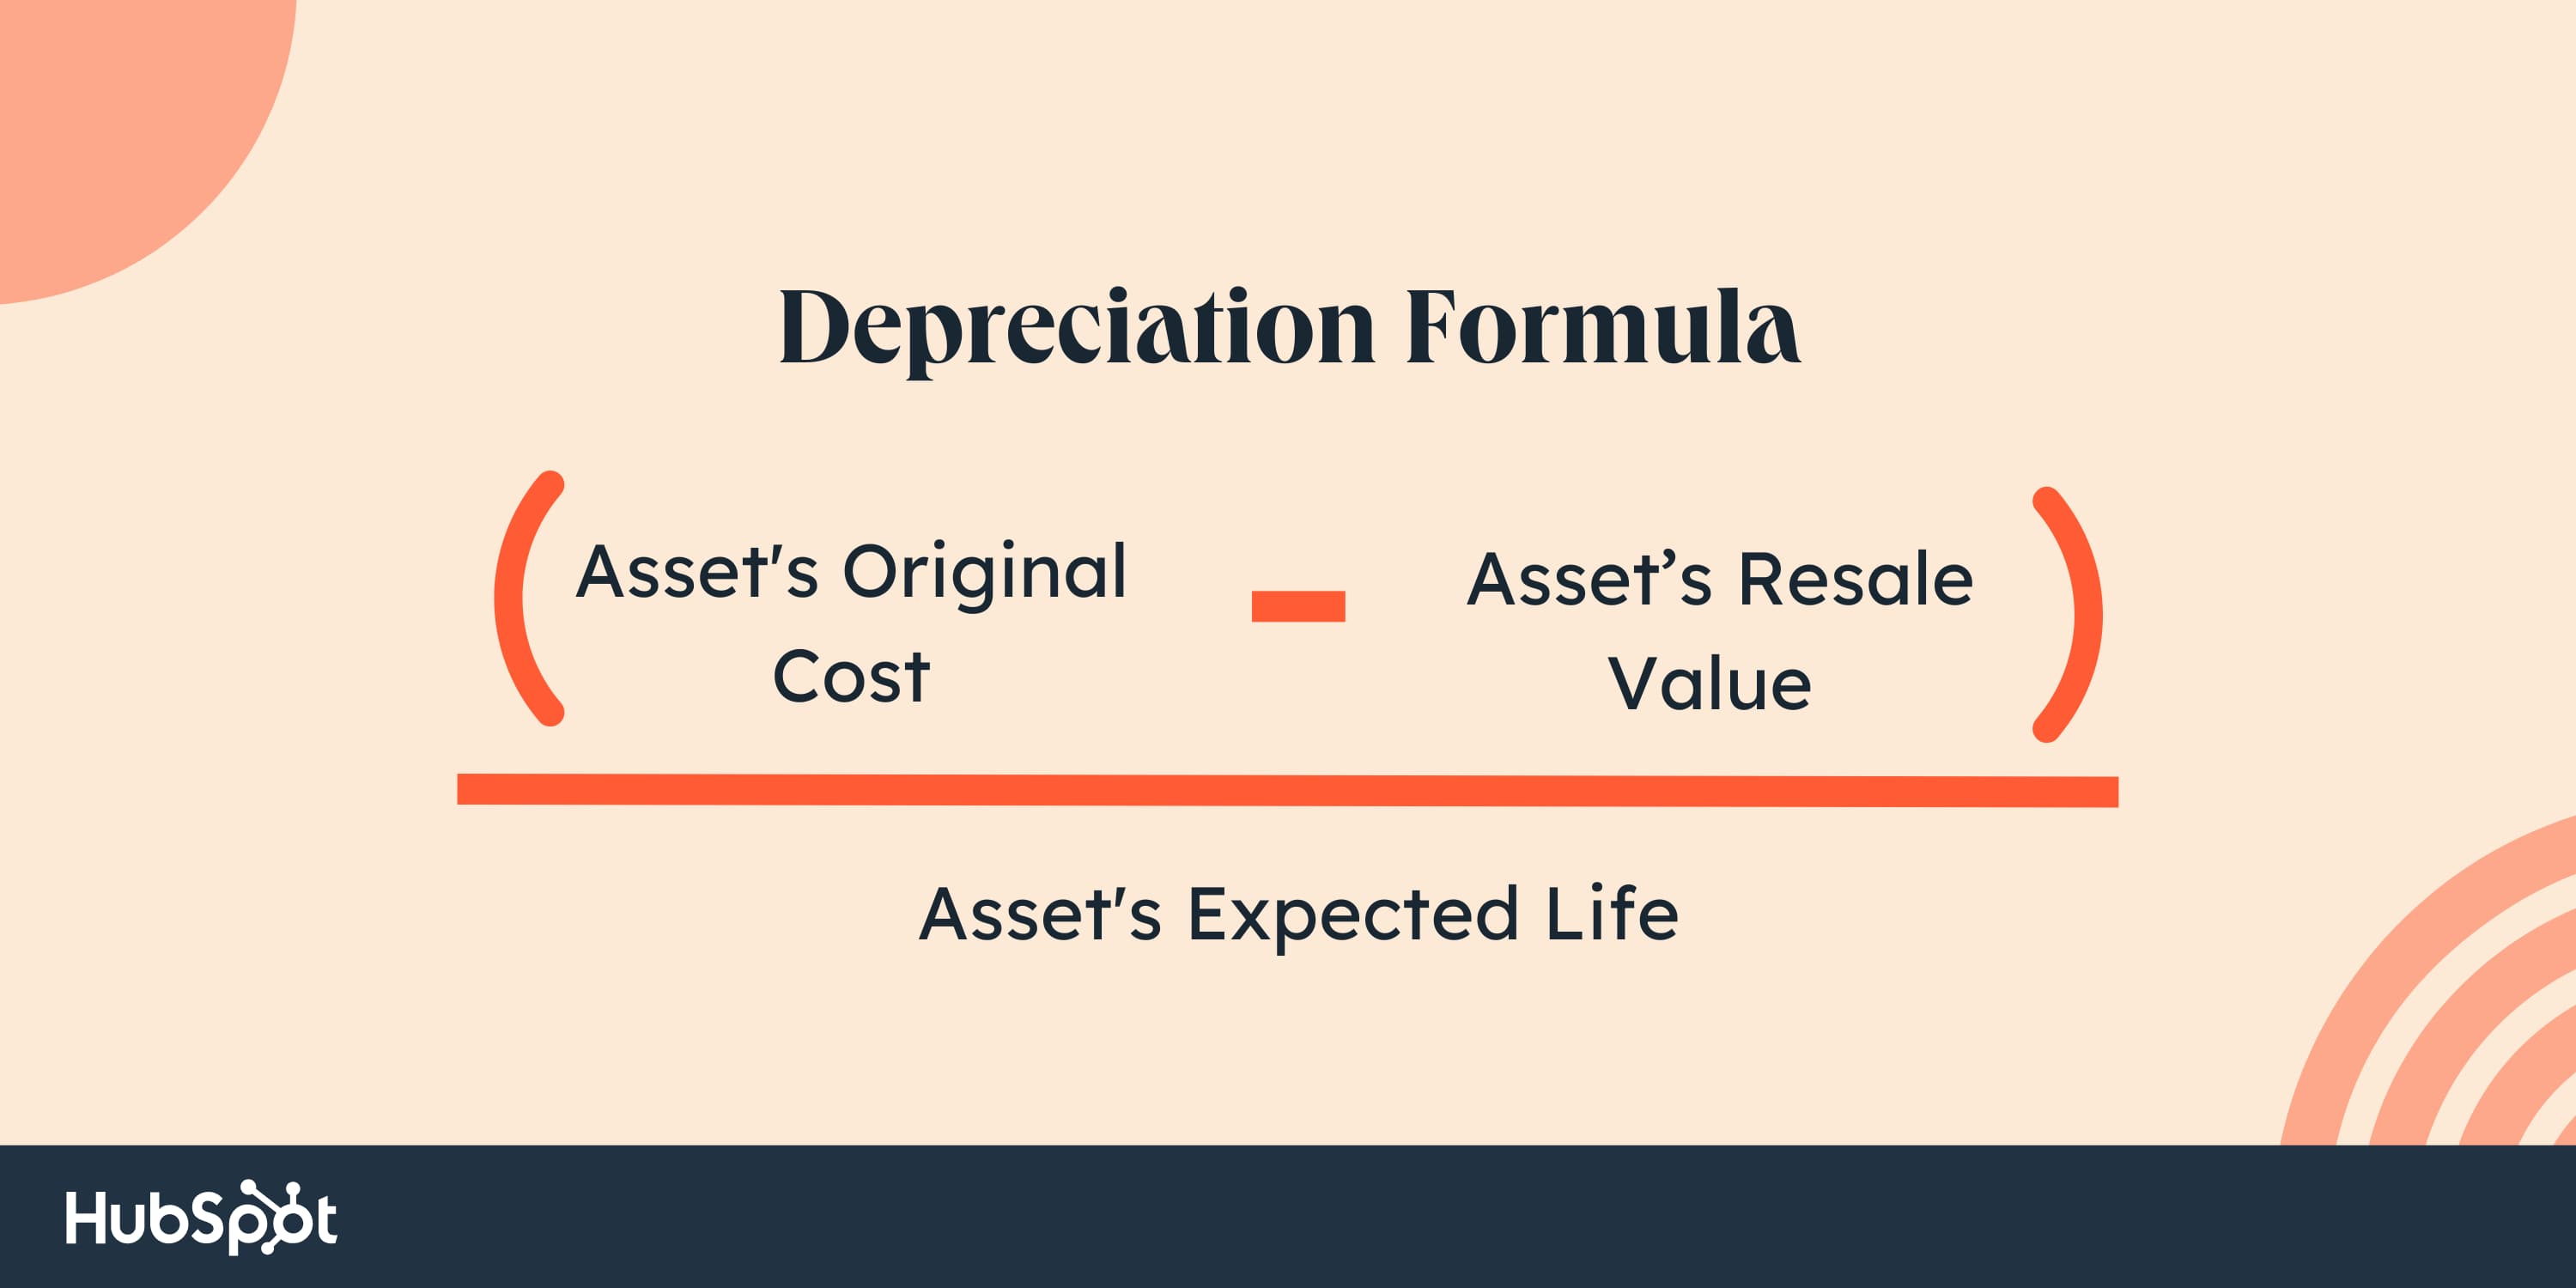 depreciation formula. Asset’s original cost minus its resale value divided by the asset’s expected life